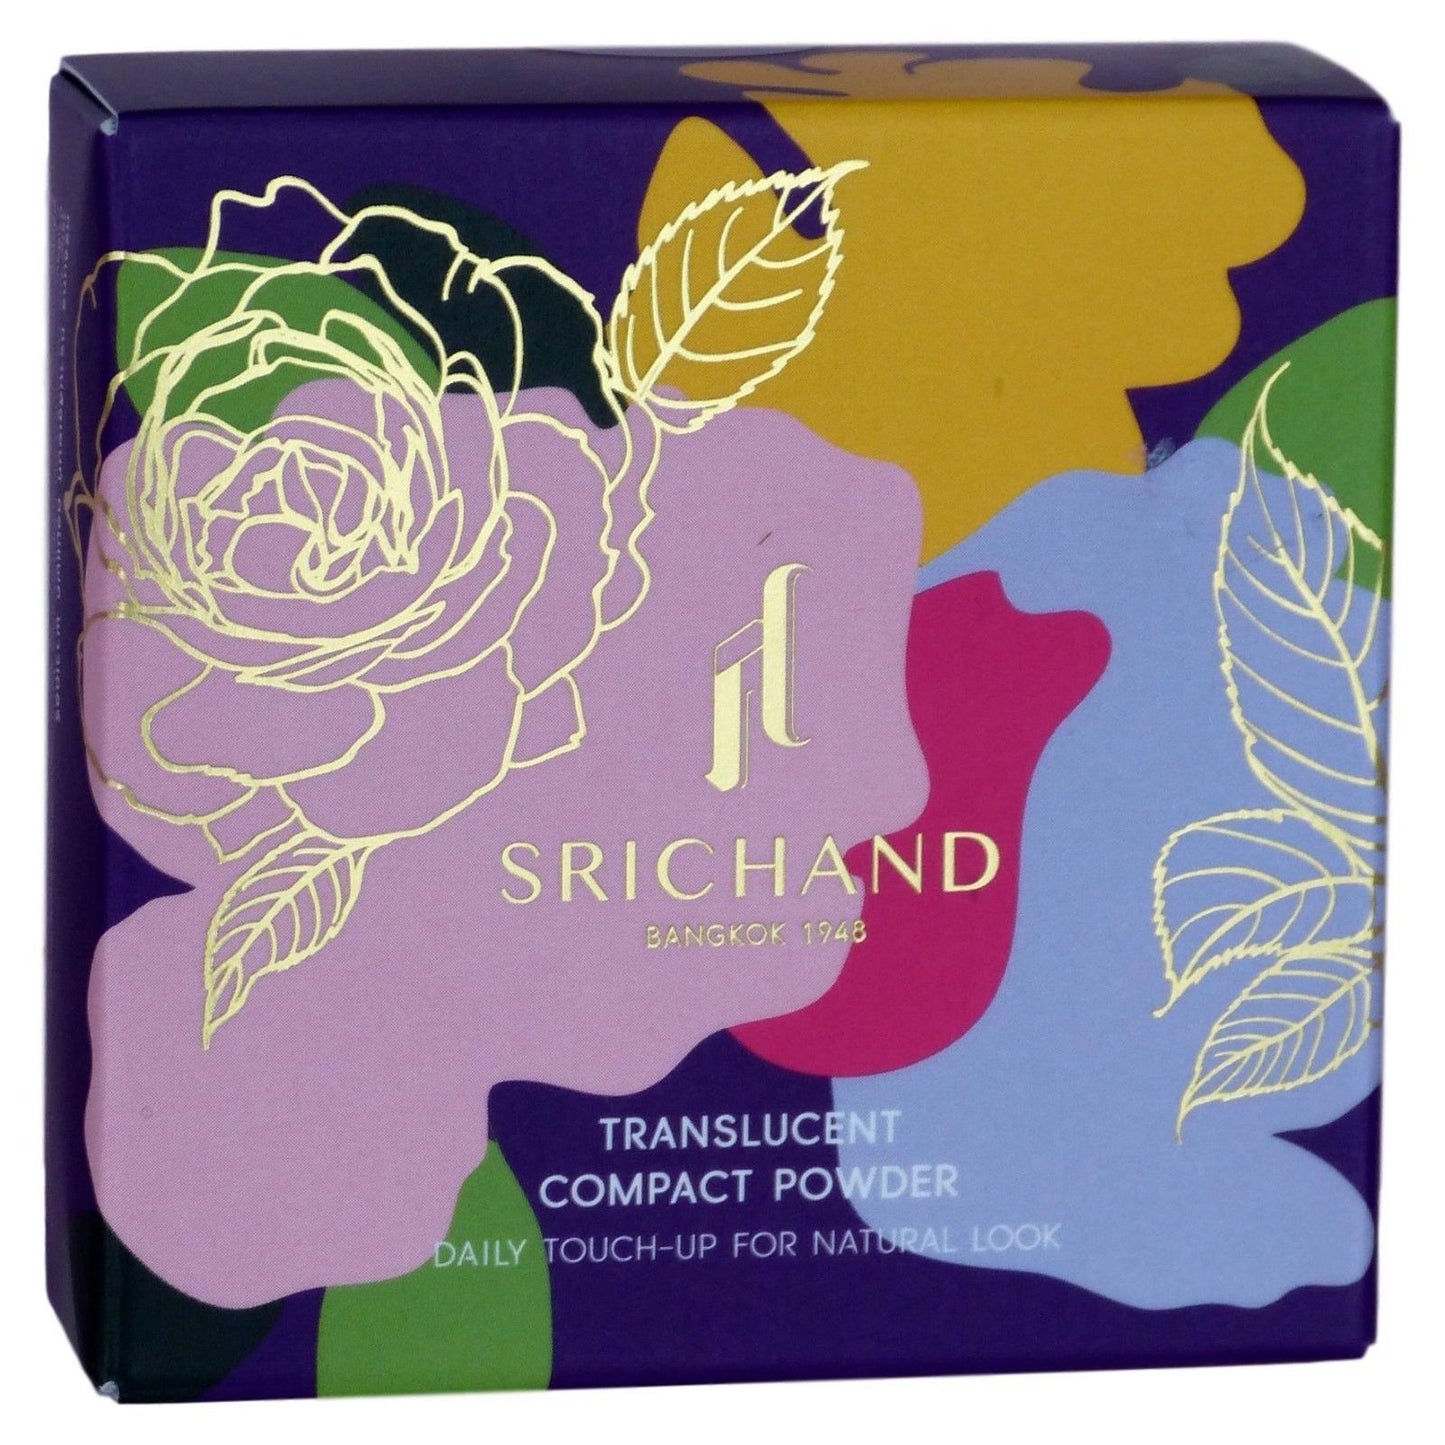 Srichand Translucent Compact Powder Daily Touch Up Natural Look 9 grams - Asian Beauty Supply